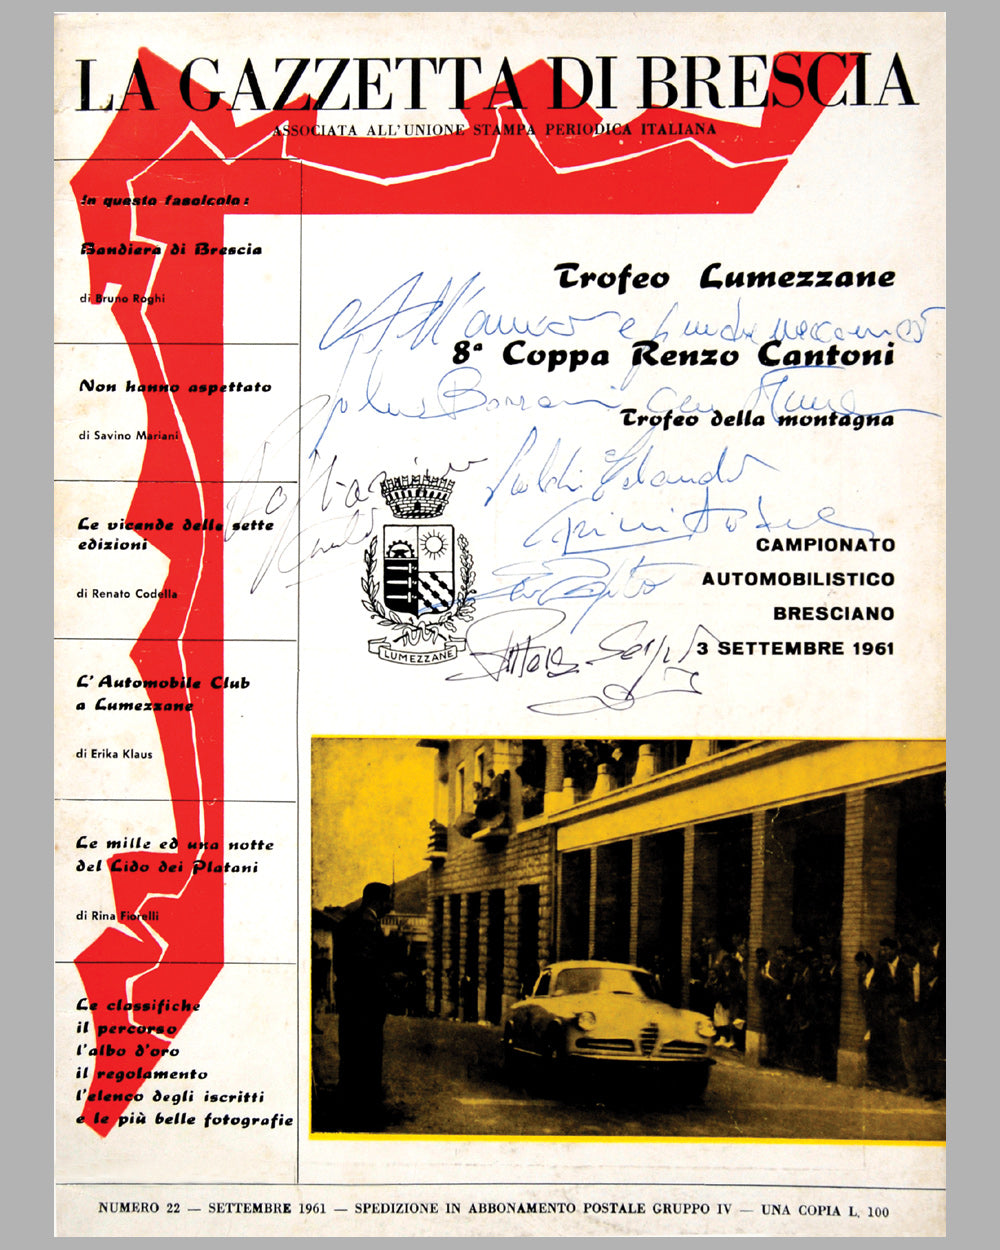 8th Coppa Renzo Cantoni Road Rally program, Sept. 1961, Autographed by drivers